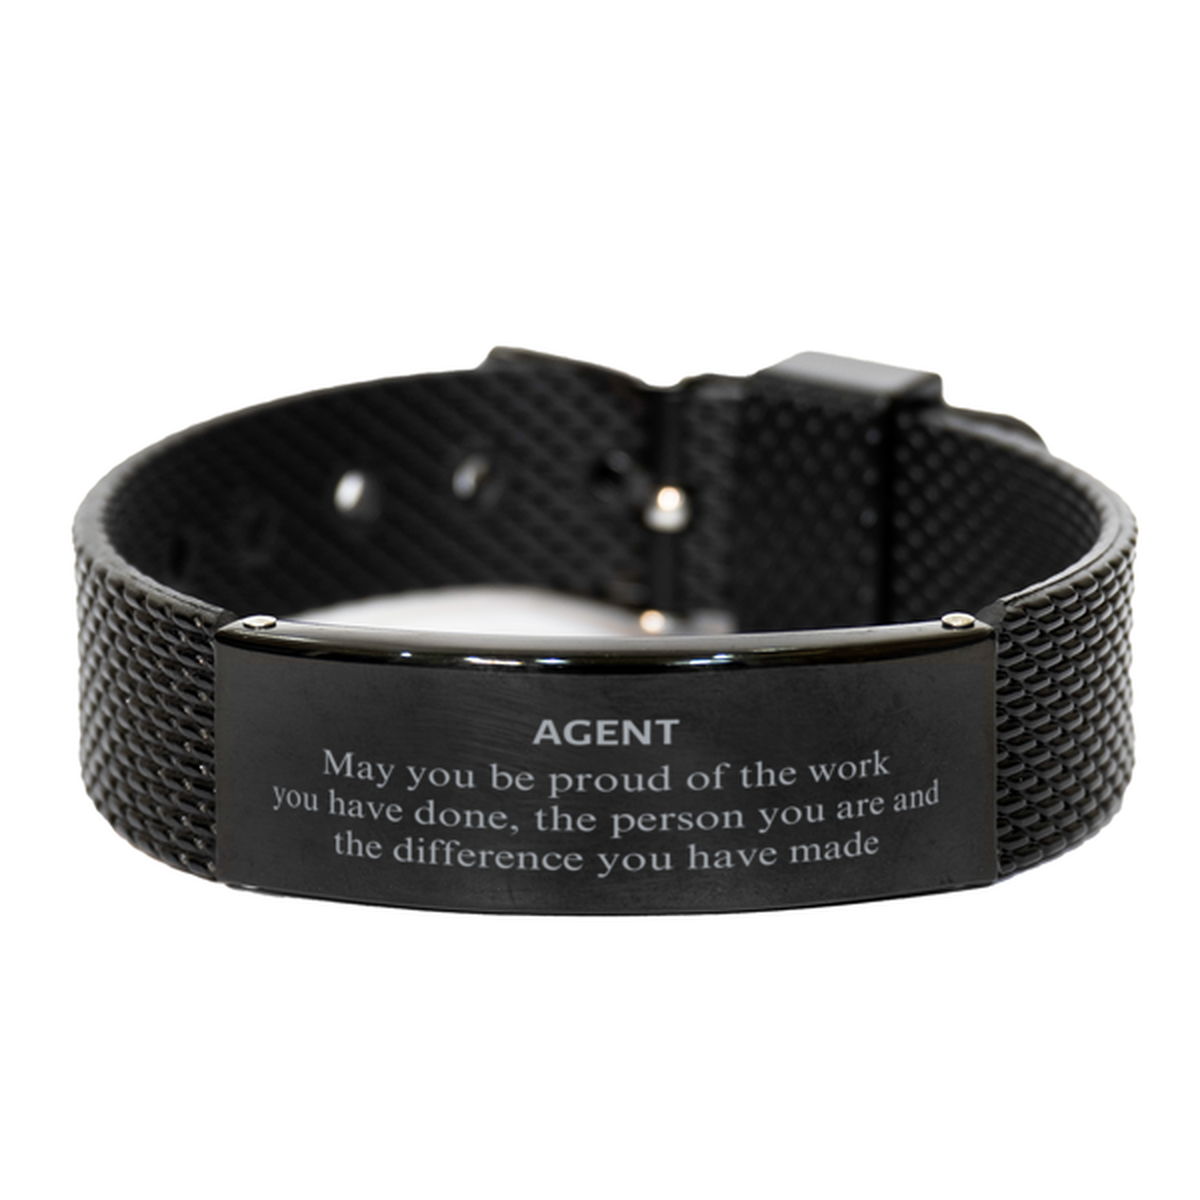 Agent May you be proud of the work you have done, Retirement Agent Black Shark Mesh Bracelet for Colleague Appreciation Gifts Amazing for Agent